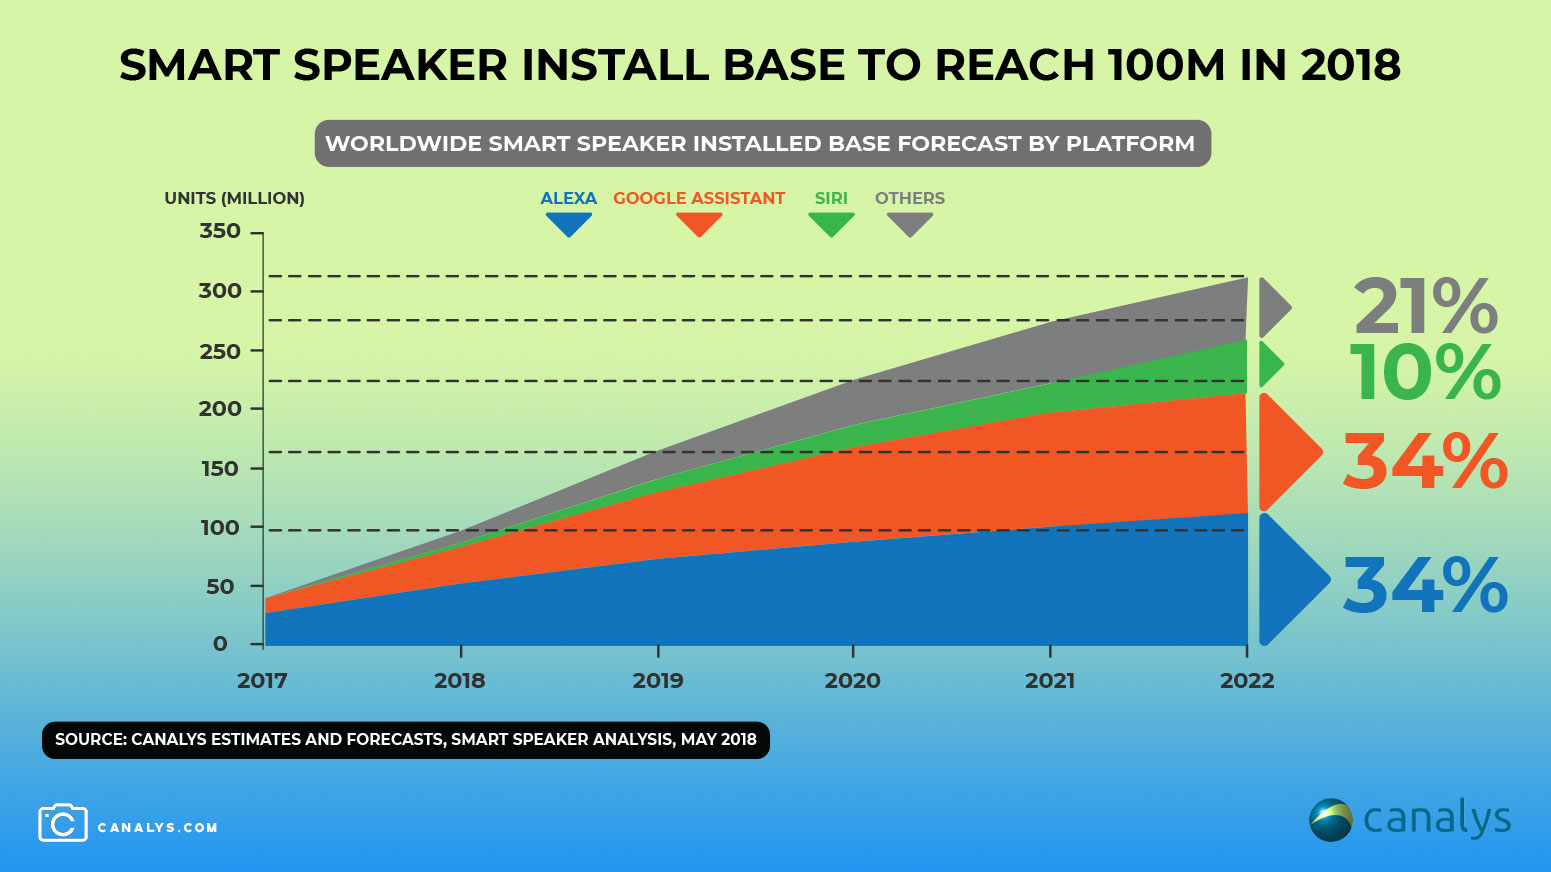 Amazon Smart Speaker Install Base to Reach 100M in 2018